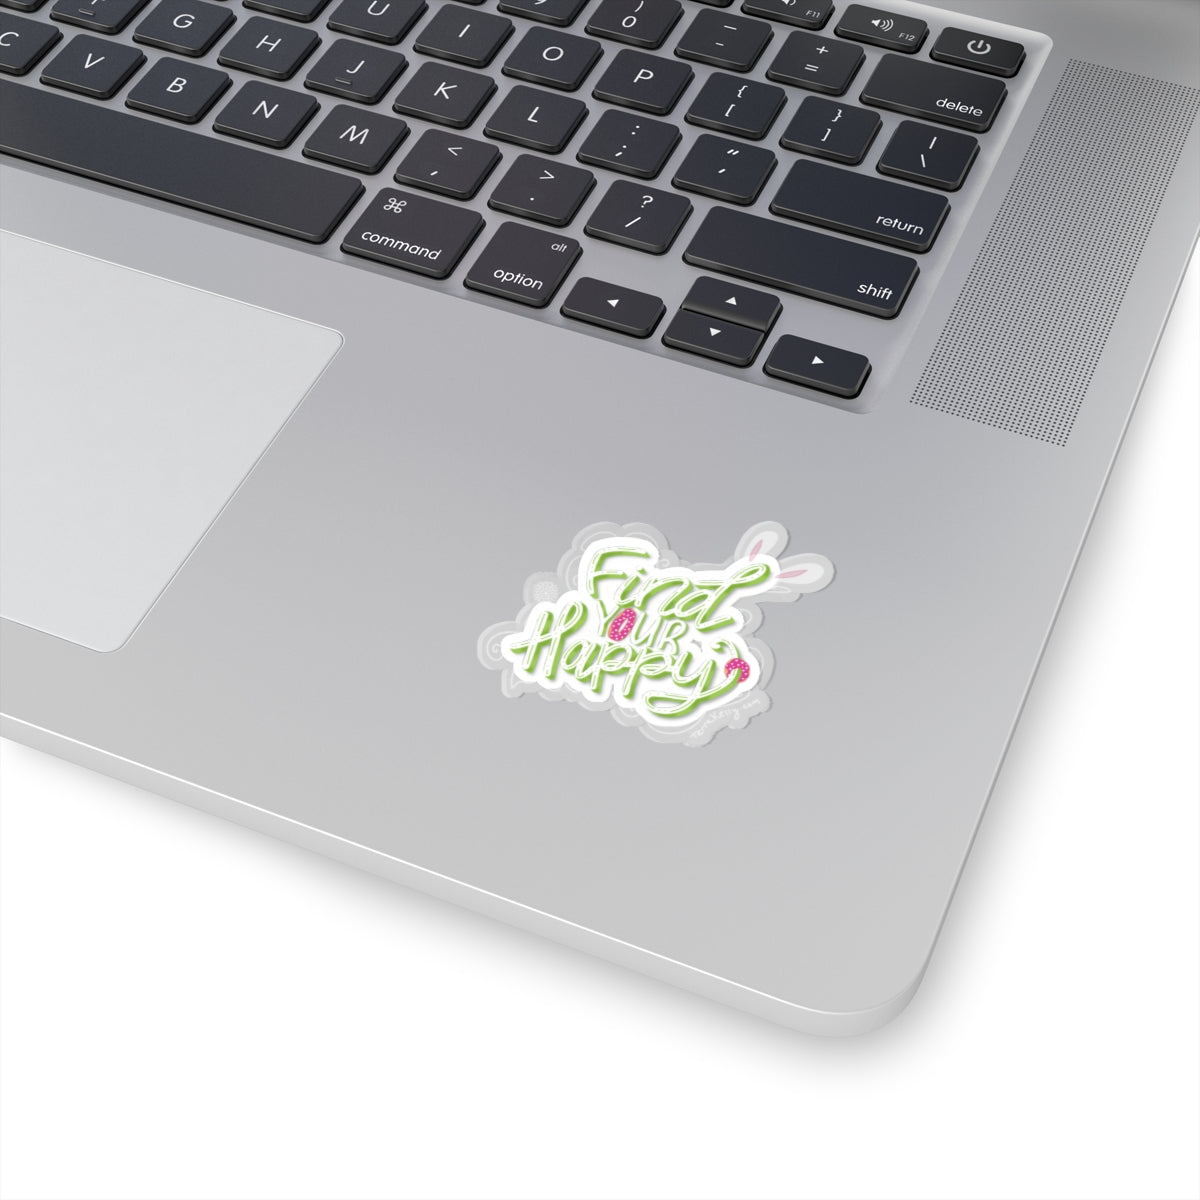 Find Your Happy Kiss-Cut Stickers | Computer Sticker | Transparent Sticker | FREE SHIPPING